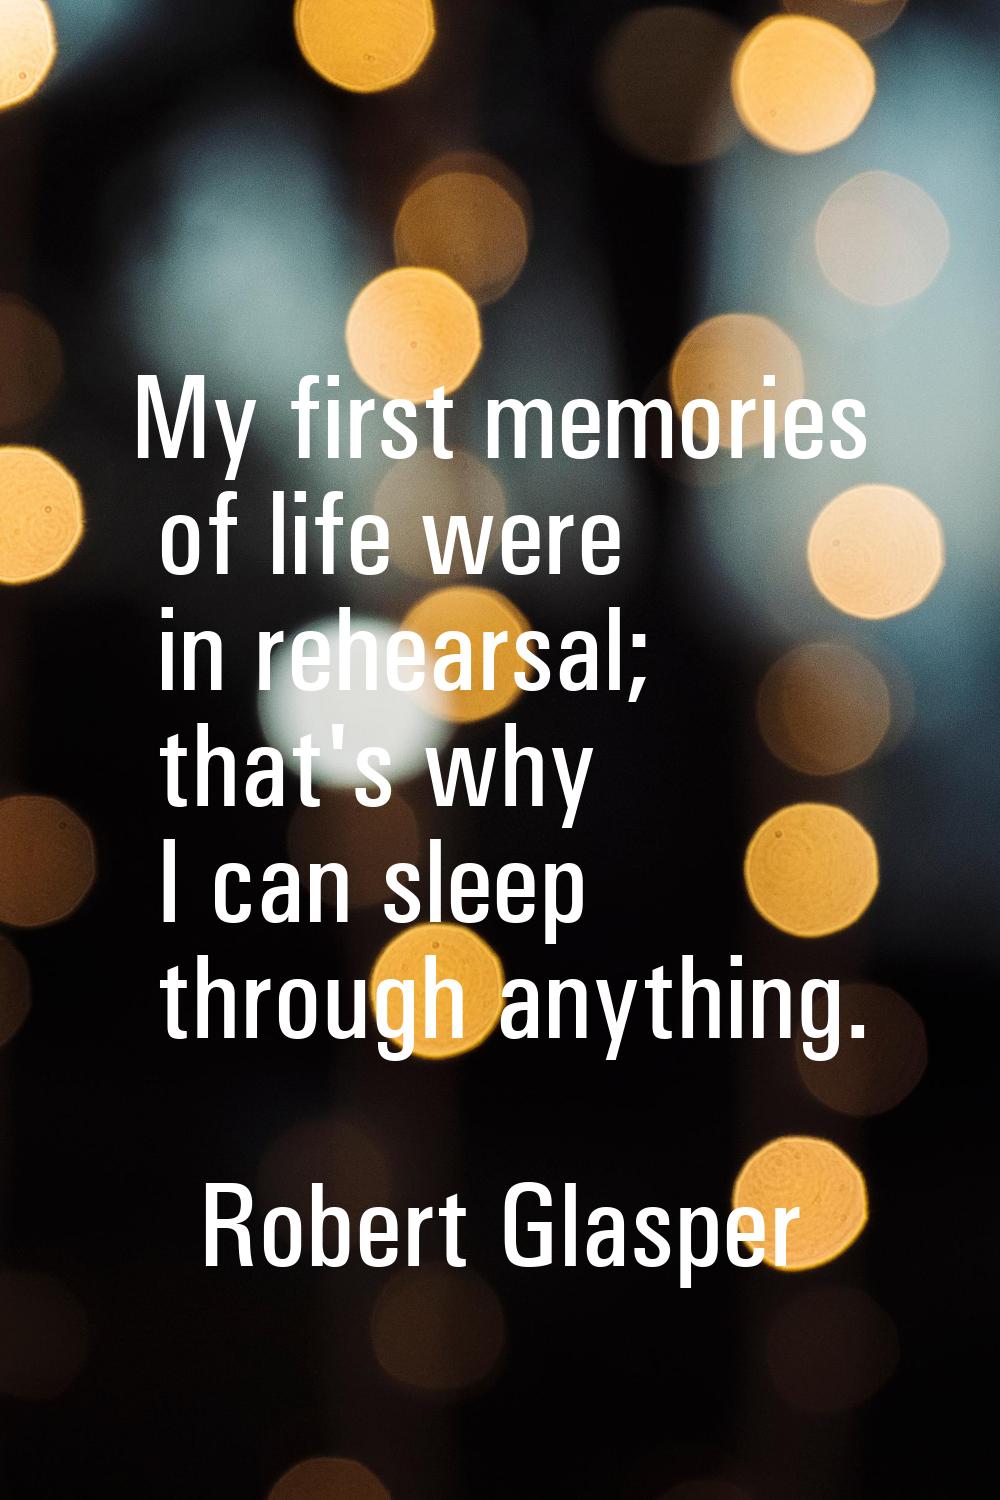 My first memories of life were in rehearsal; that's why I can sleep through anything.